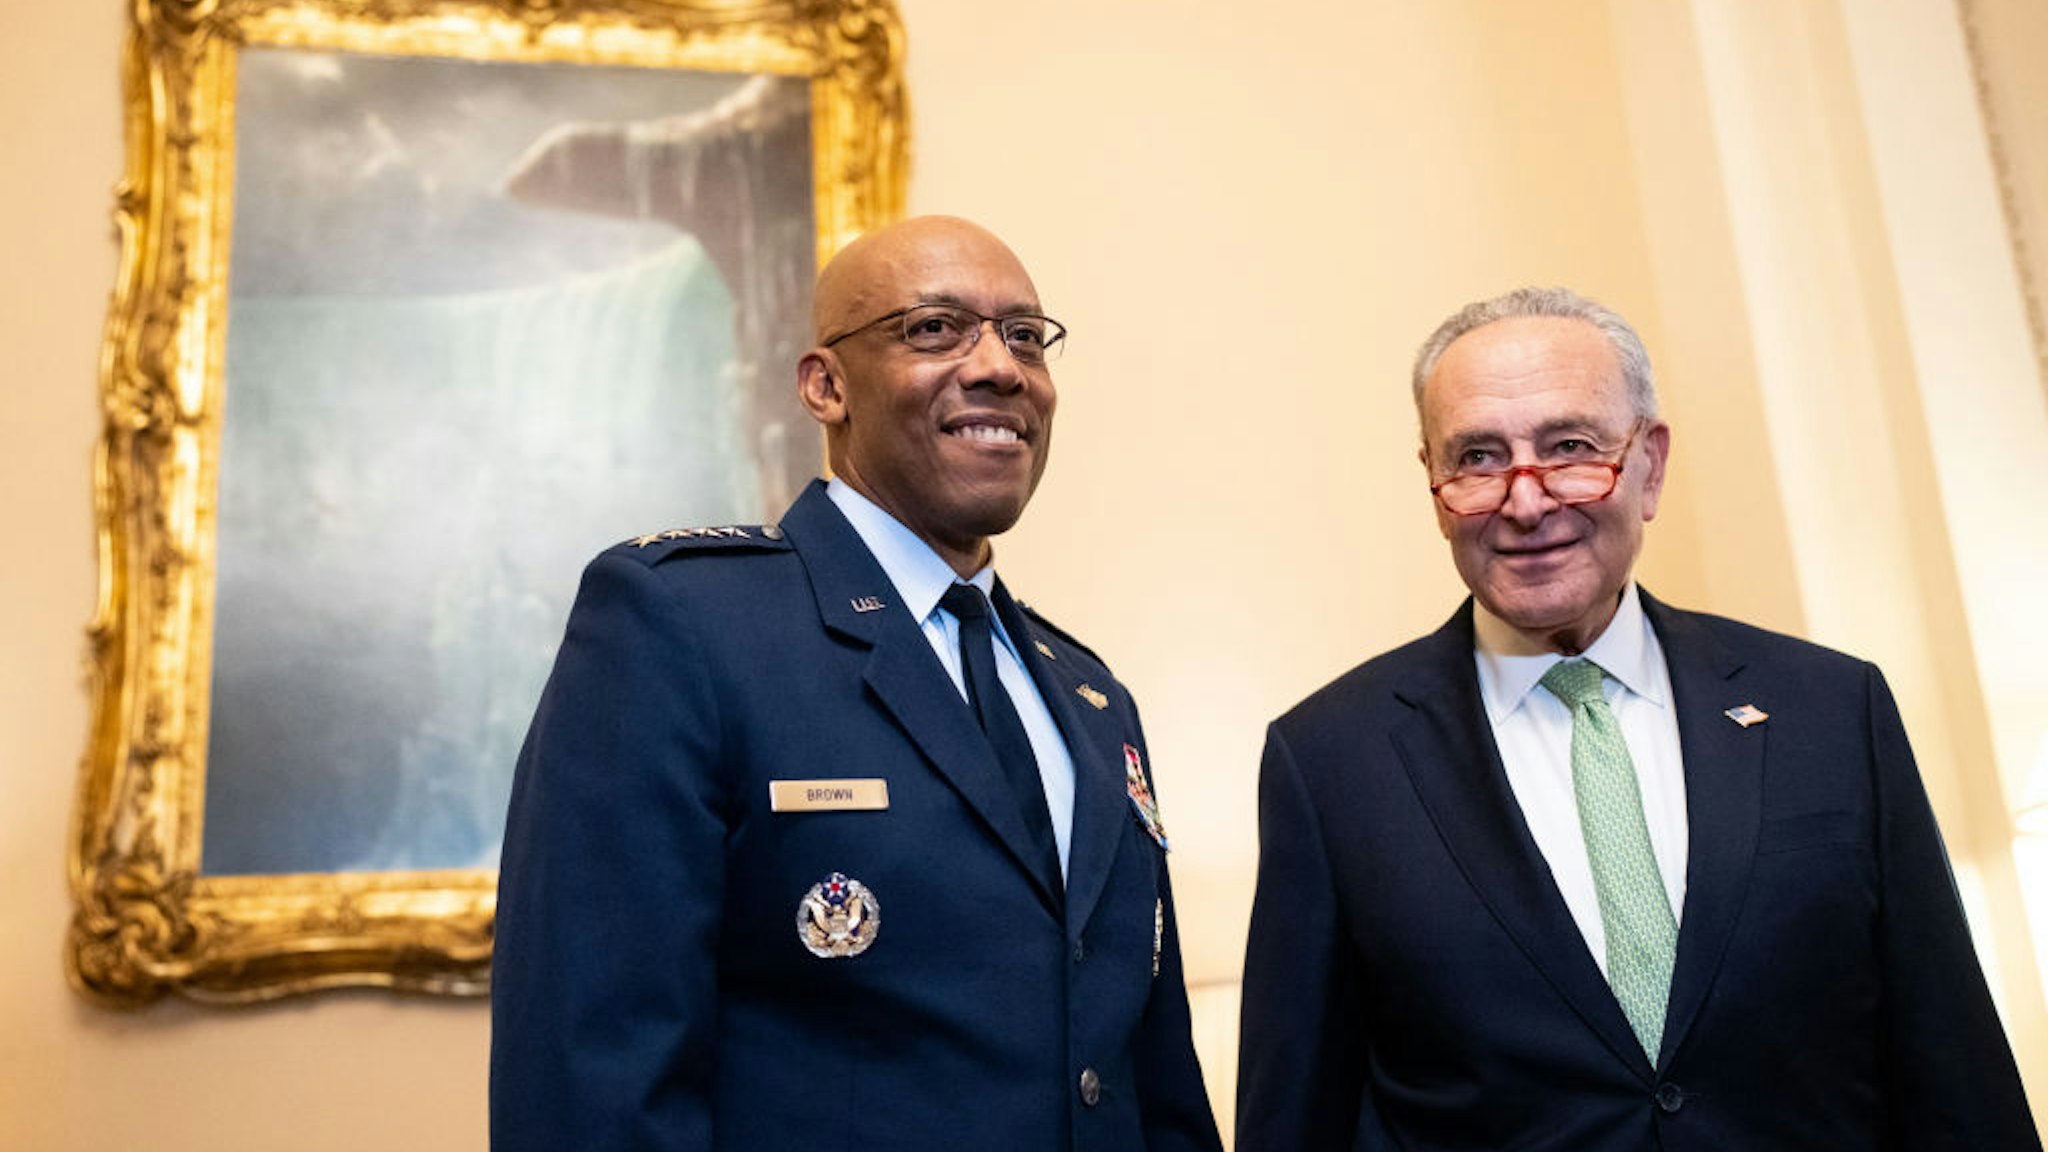 WASHINGTON - JUNE 22: Air Force General Charles Brown Jr, President Biden's nominee to be the next Chairman of the Joint Chiefs of Staff, is seen during his photo-op in Senate Majority Leader Chuck Schumer's office on Thursday, June 22, 2023.